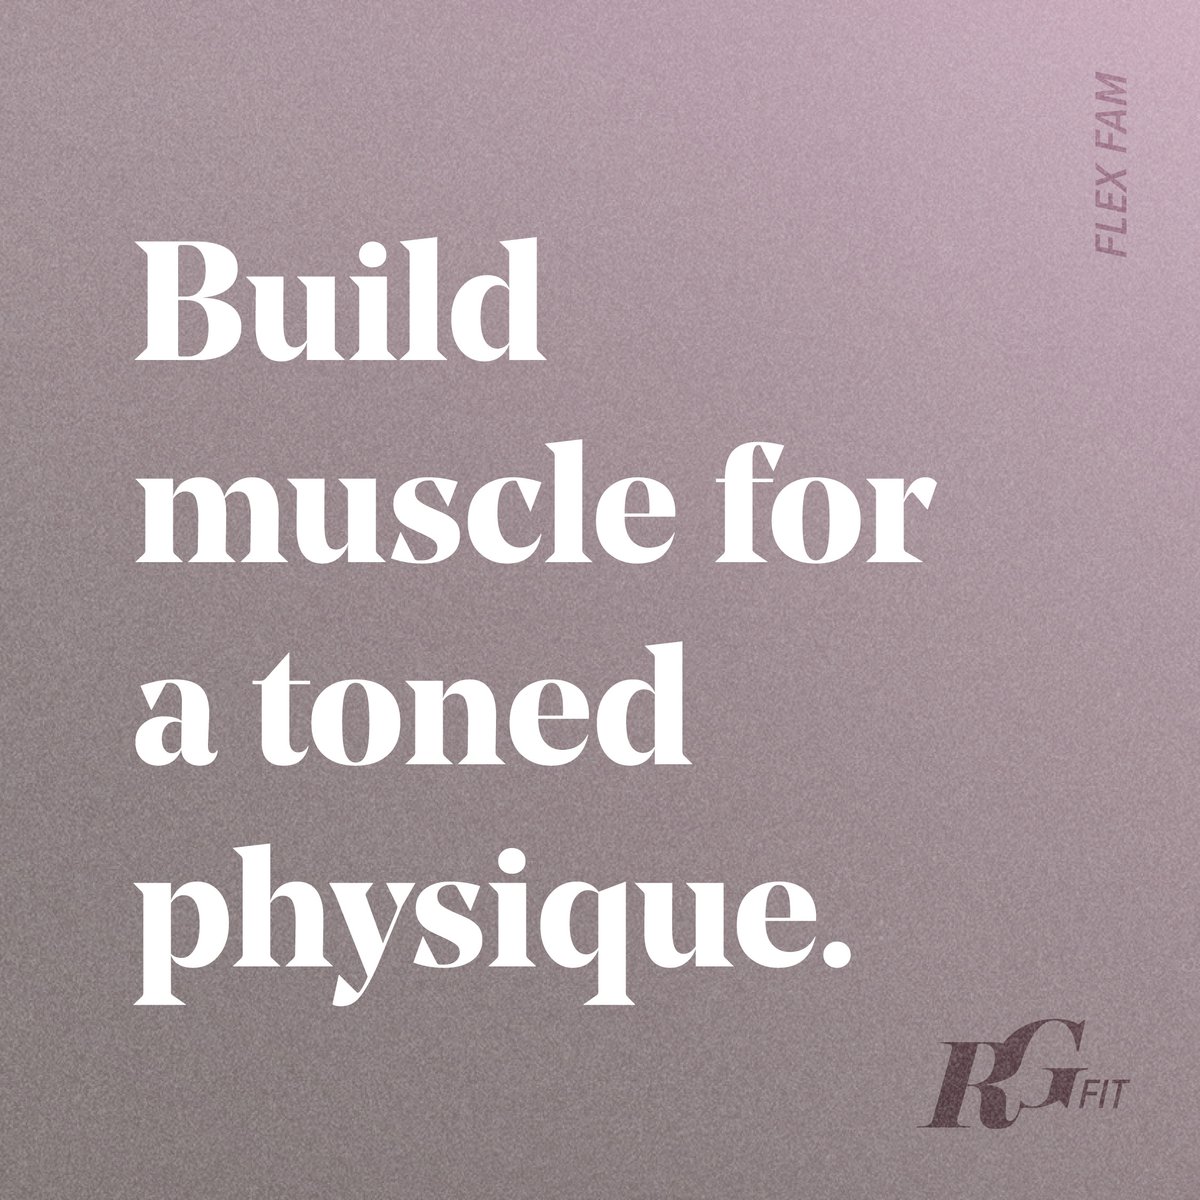 Weight loss comes from your diet, and that muscle you built reveals the toned physique.

#fitness #fitnessmotivation #weightlifting #girlswholift #womenwholift #getstrong #liftheavy #resistancetraining #gymlife #workouttips #workout #liftheavyshit

rgfit.com